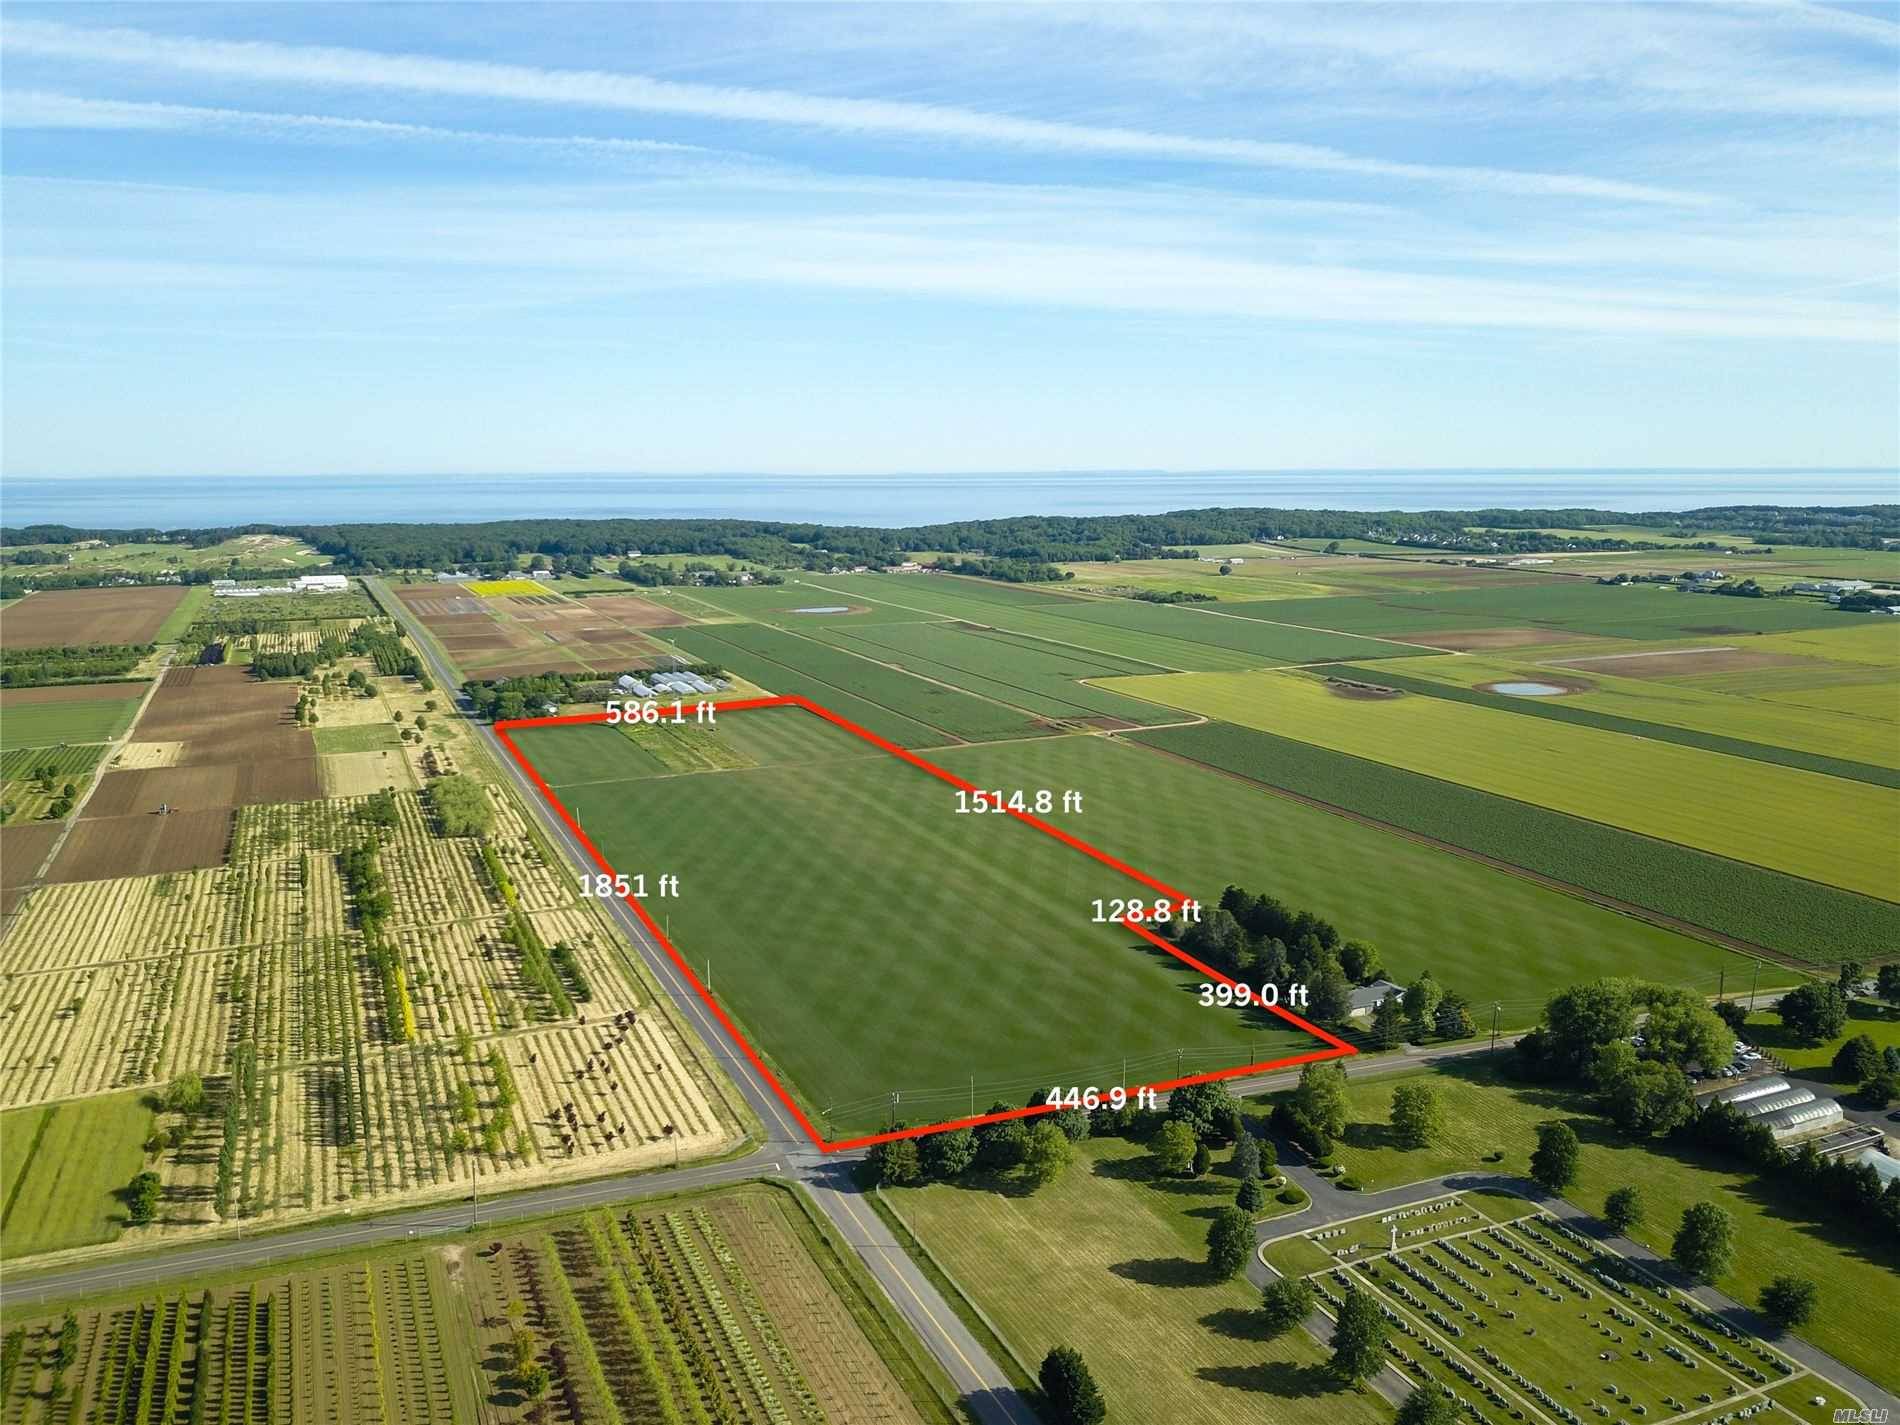 Opportunity to develop a rural part of ever growing Riverhead in the middle of farm country.